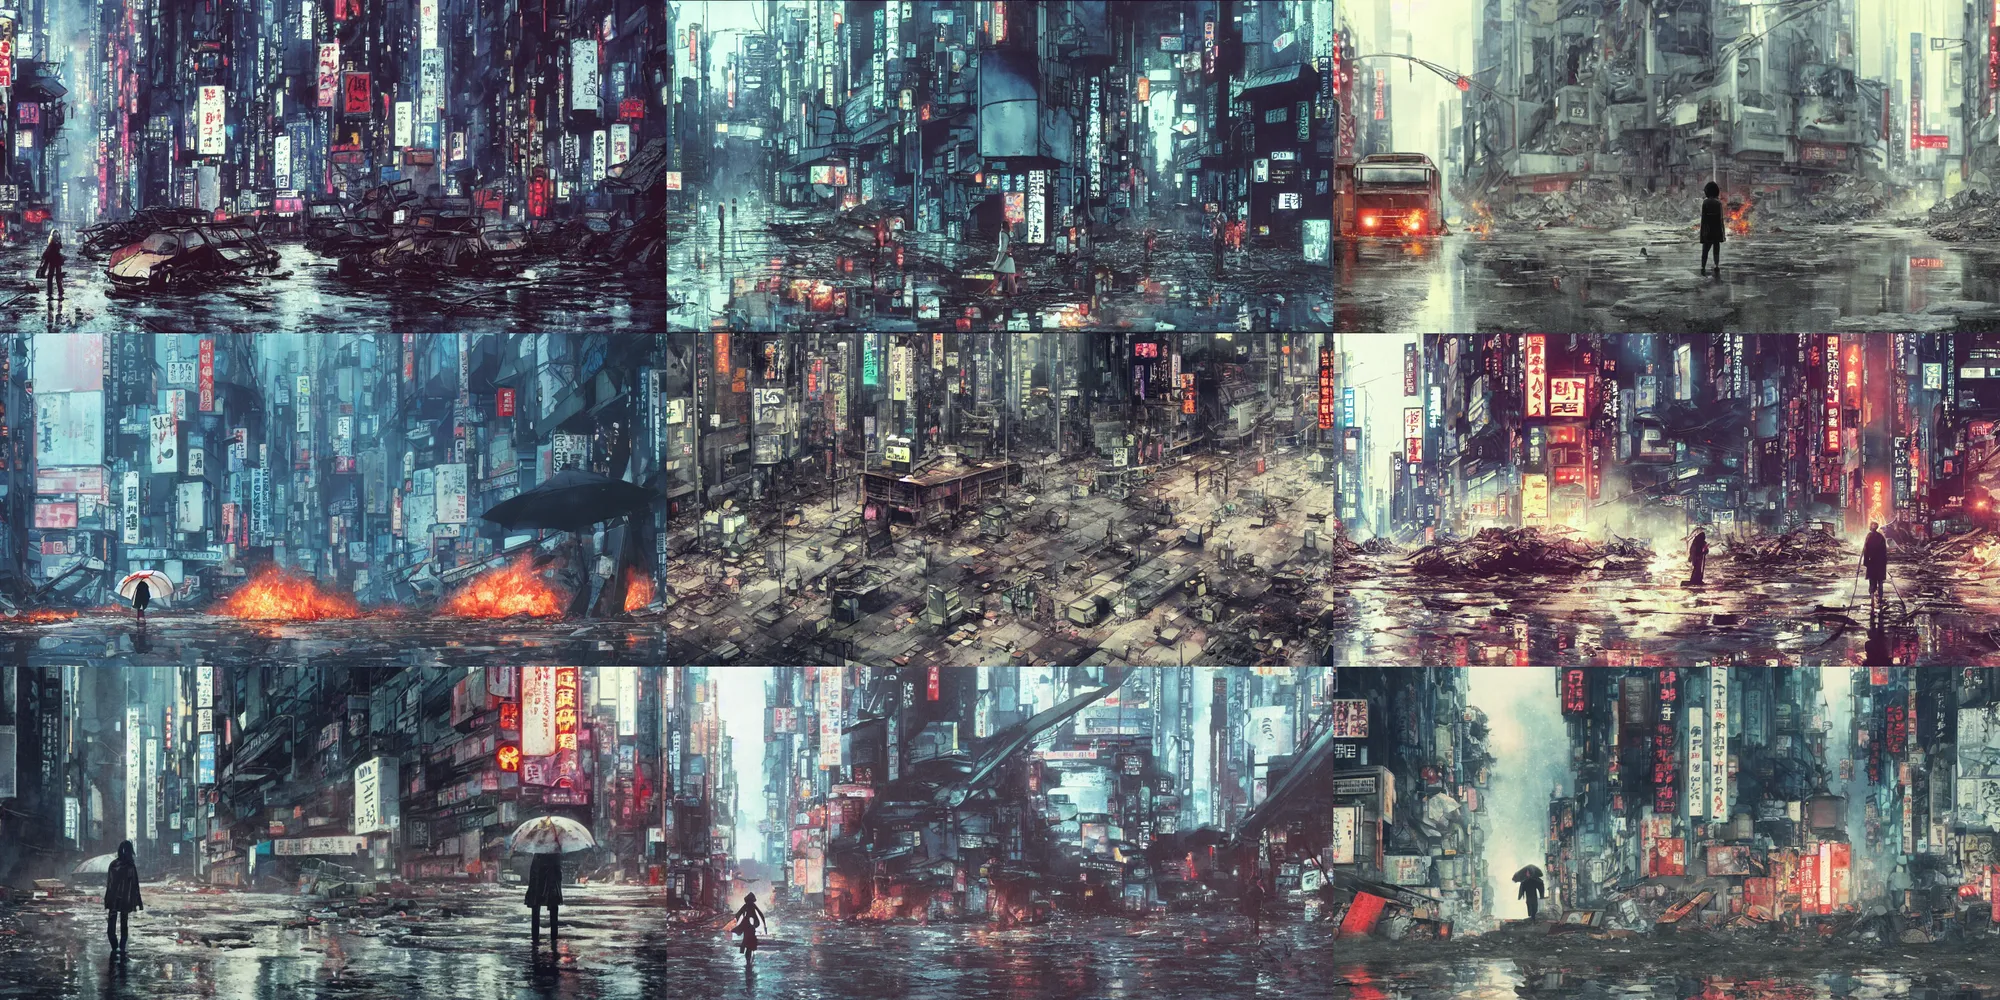 Prompt: incredible wide screenshot, ultrawide, simple water color, paper texture, katsuhiro otomo ghost in the shell movie scene, backlit shot girl in parka, wet dark road, parasol in deserted junk pile shinjuku, broke machines, bold graffiti, earthquake destruction, reflection, foggy, destroyed robots, burning bus on fire